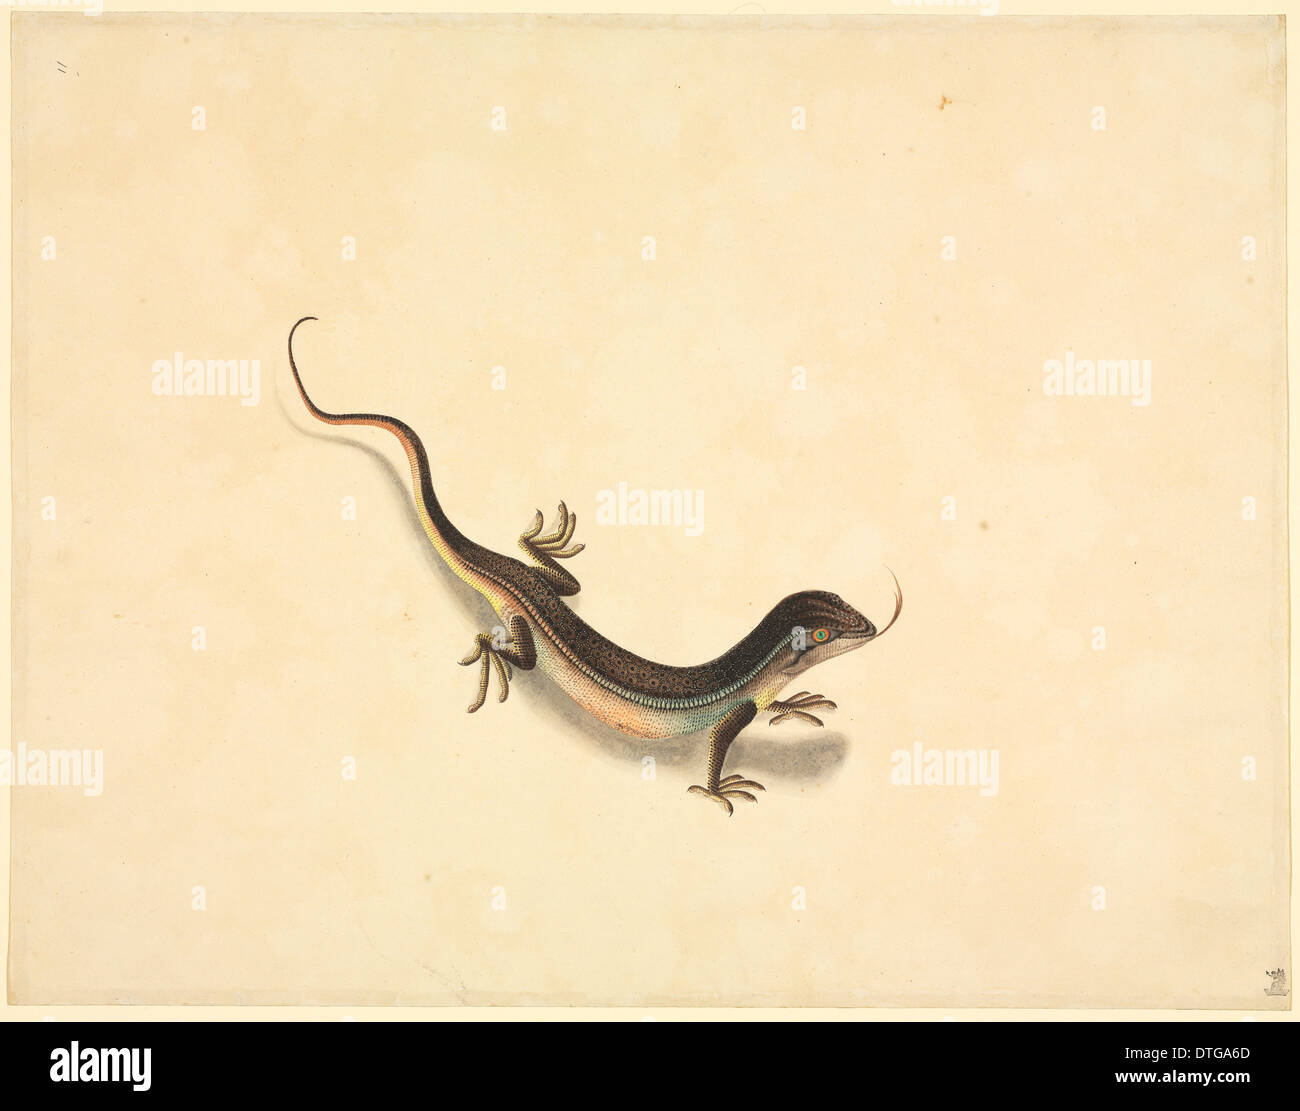 Plate 99 from the John Reeves Collection (Zoology) Stock Photo